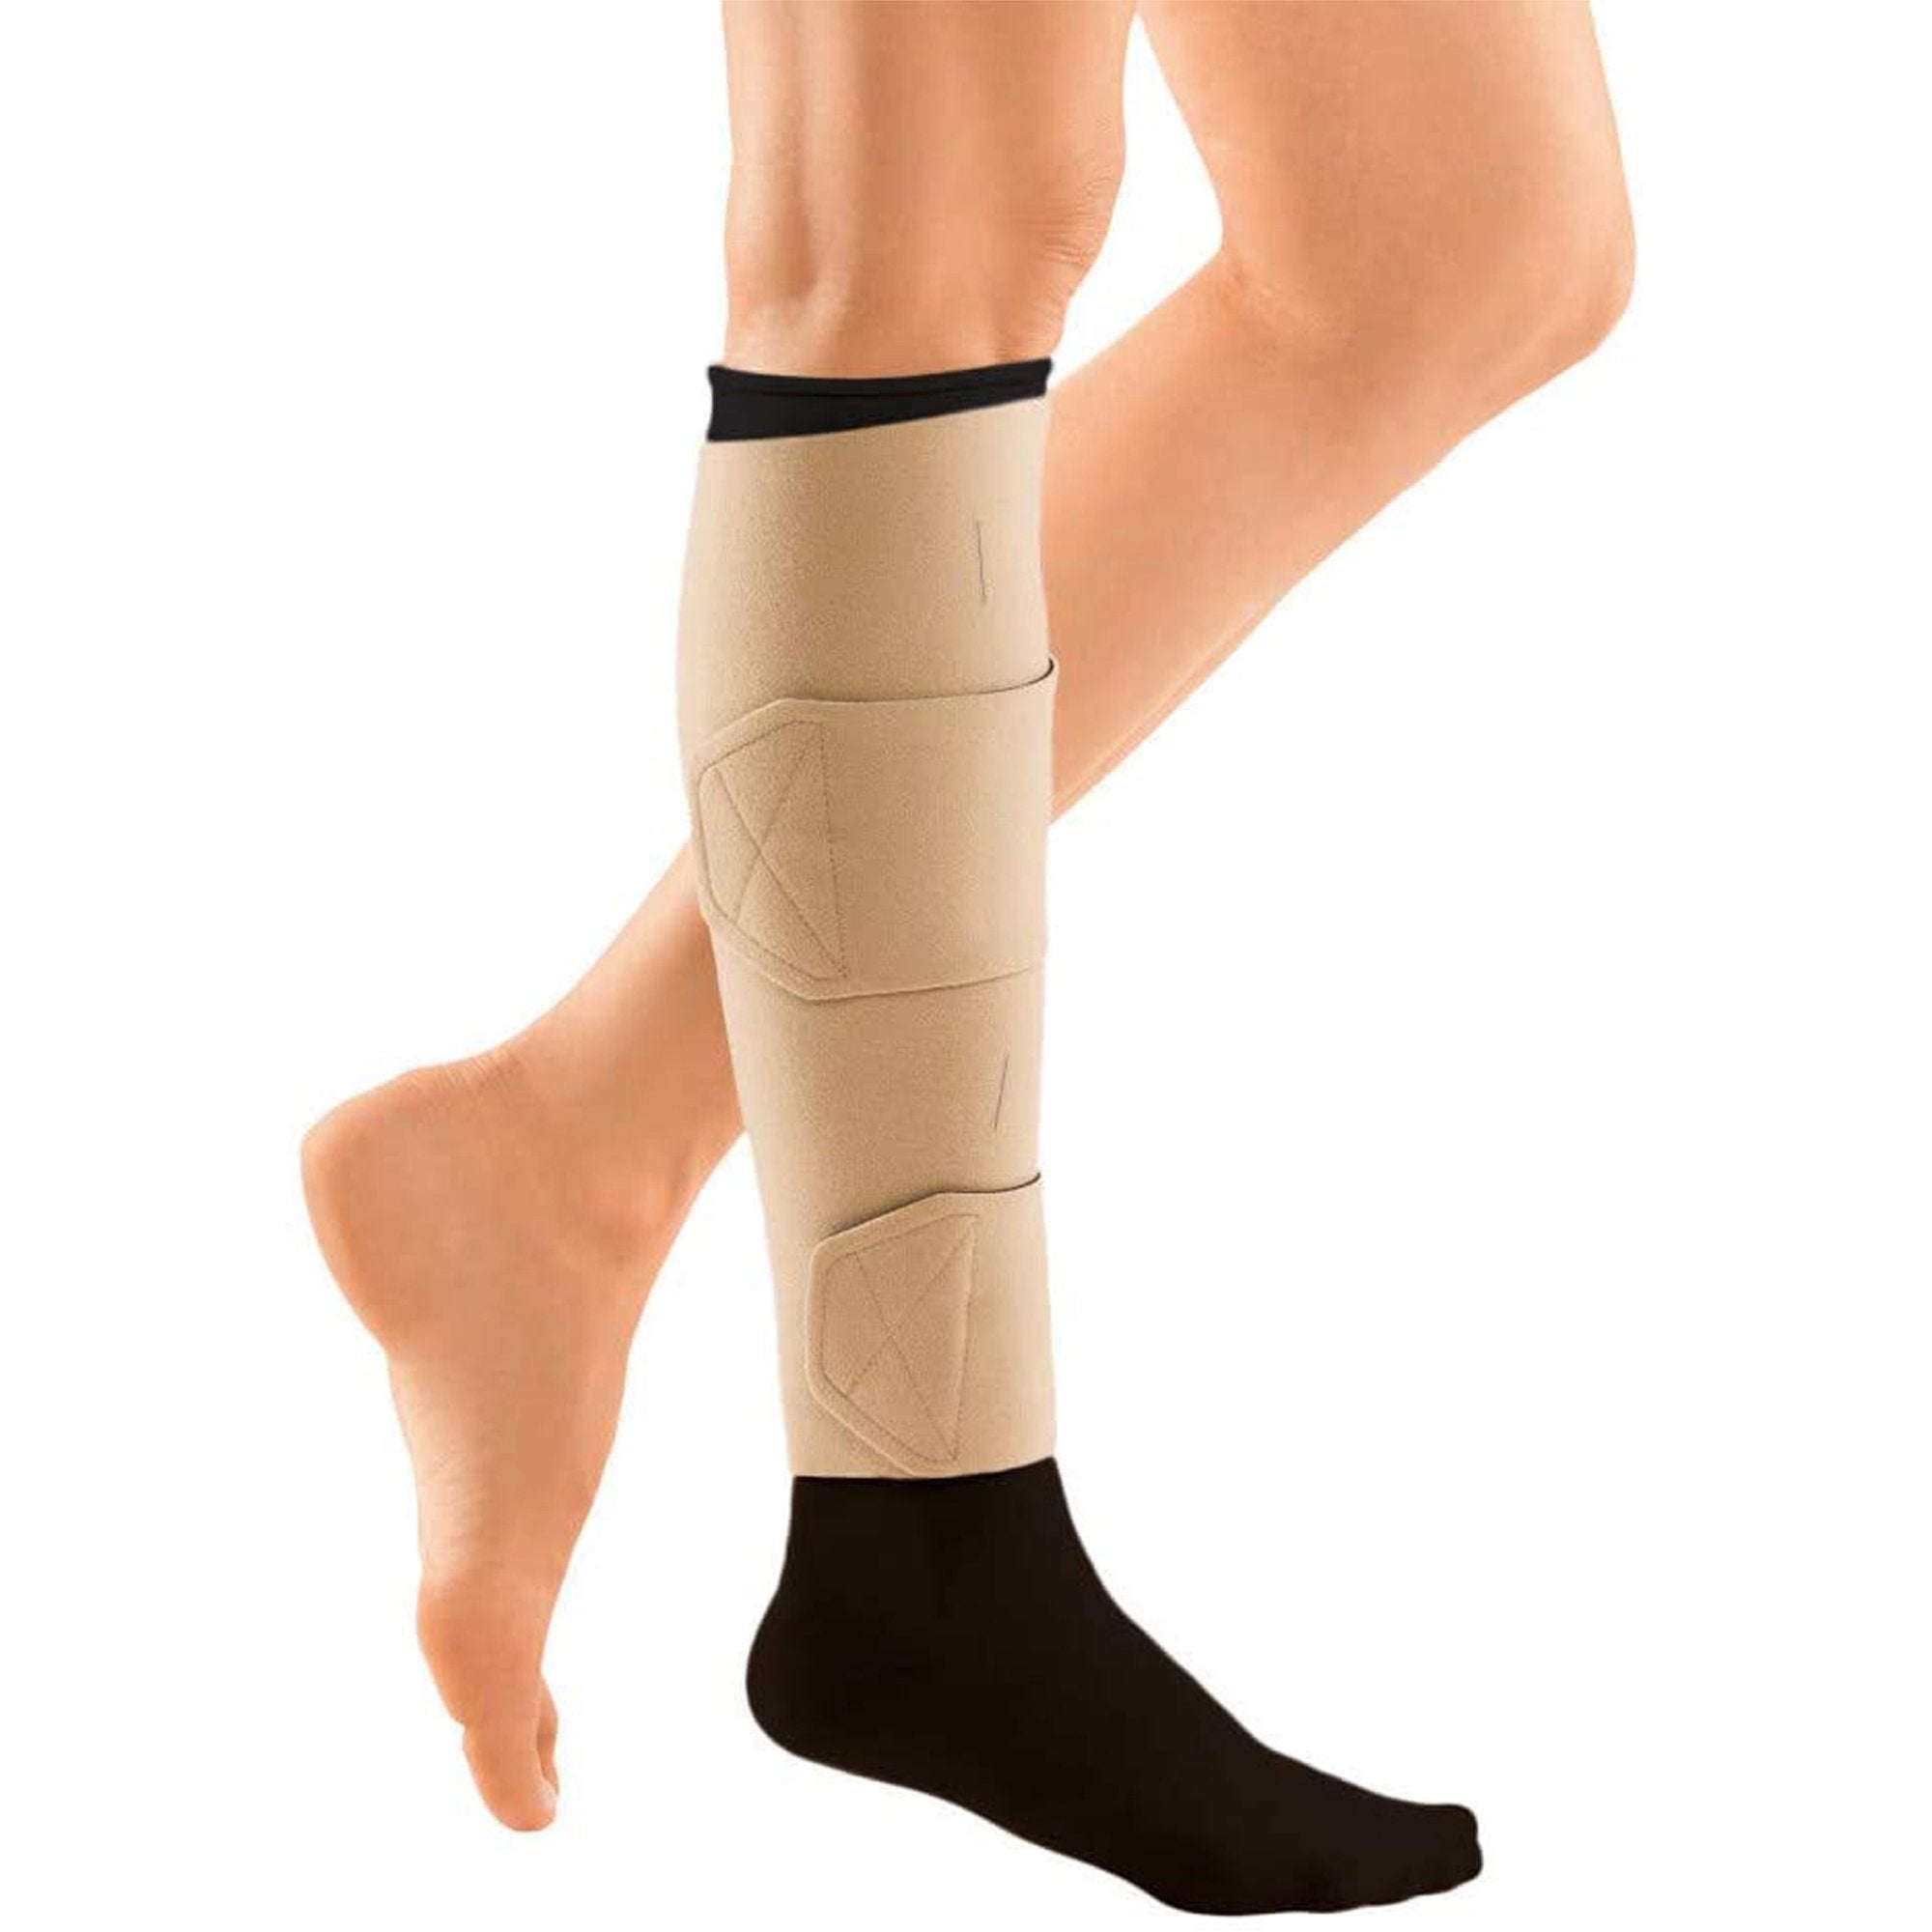 Mediusa - Compression Sleeves and Wraps